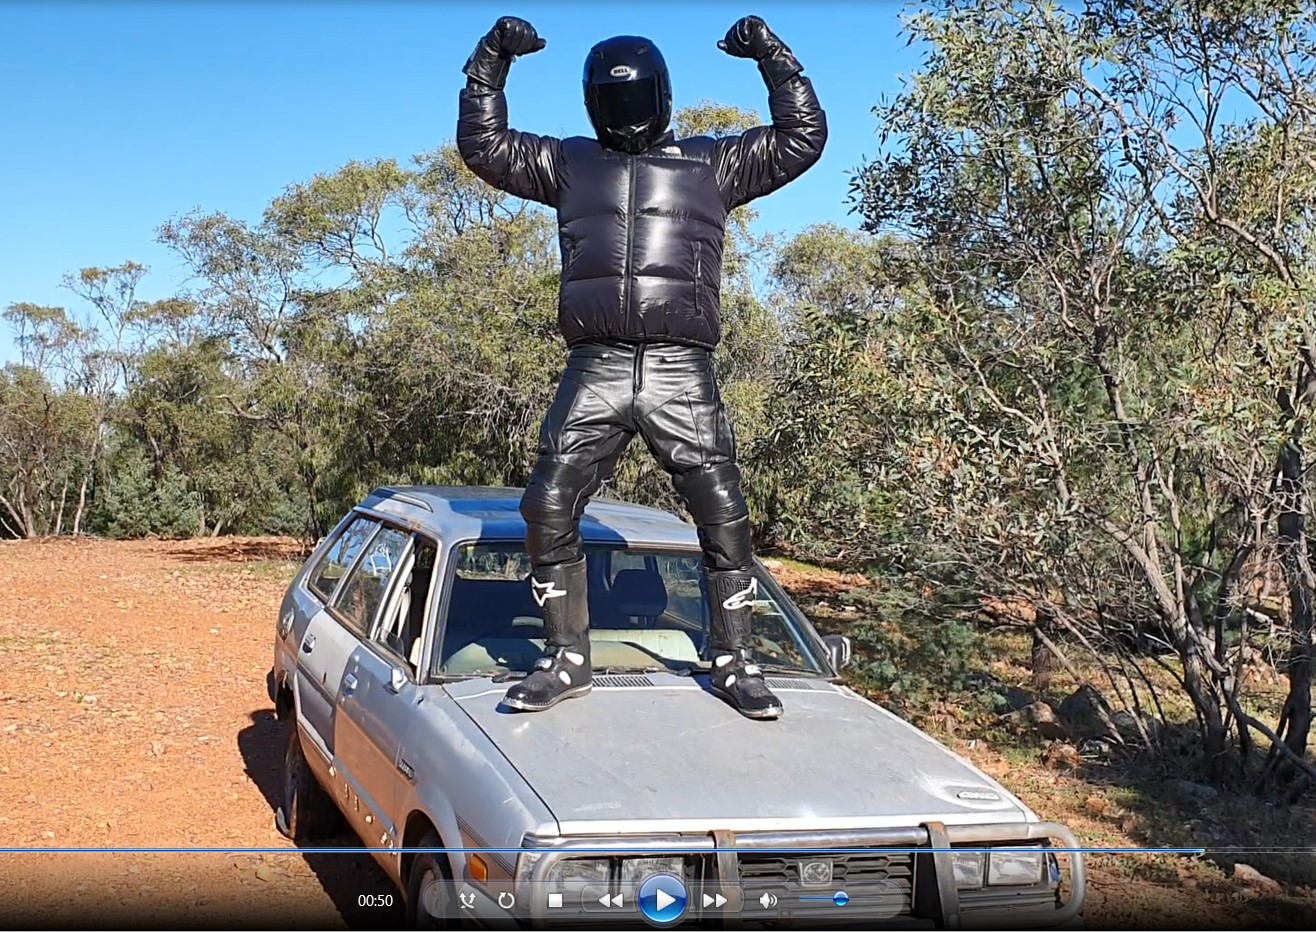 Shiny Helmeted Stomper's boots test a car to be stomped